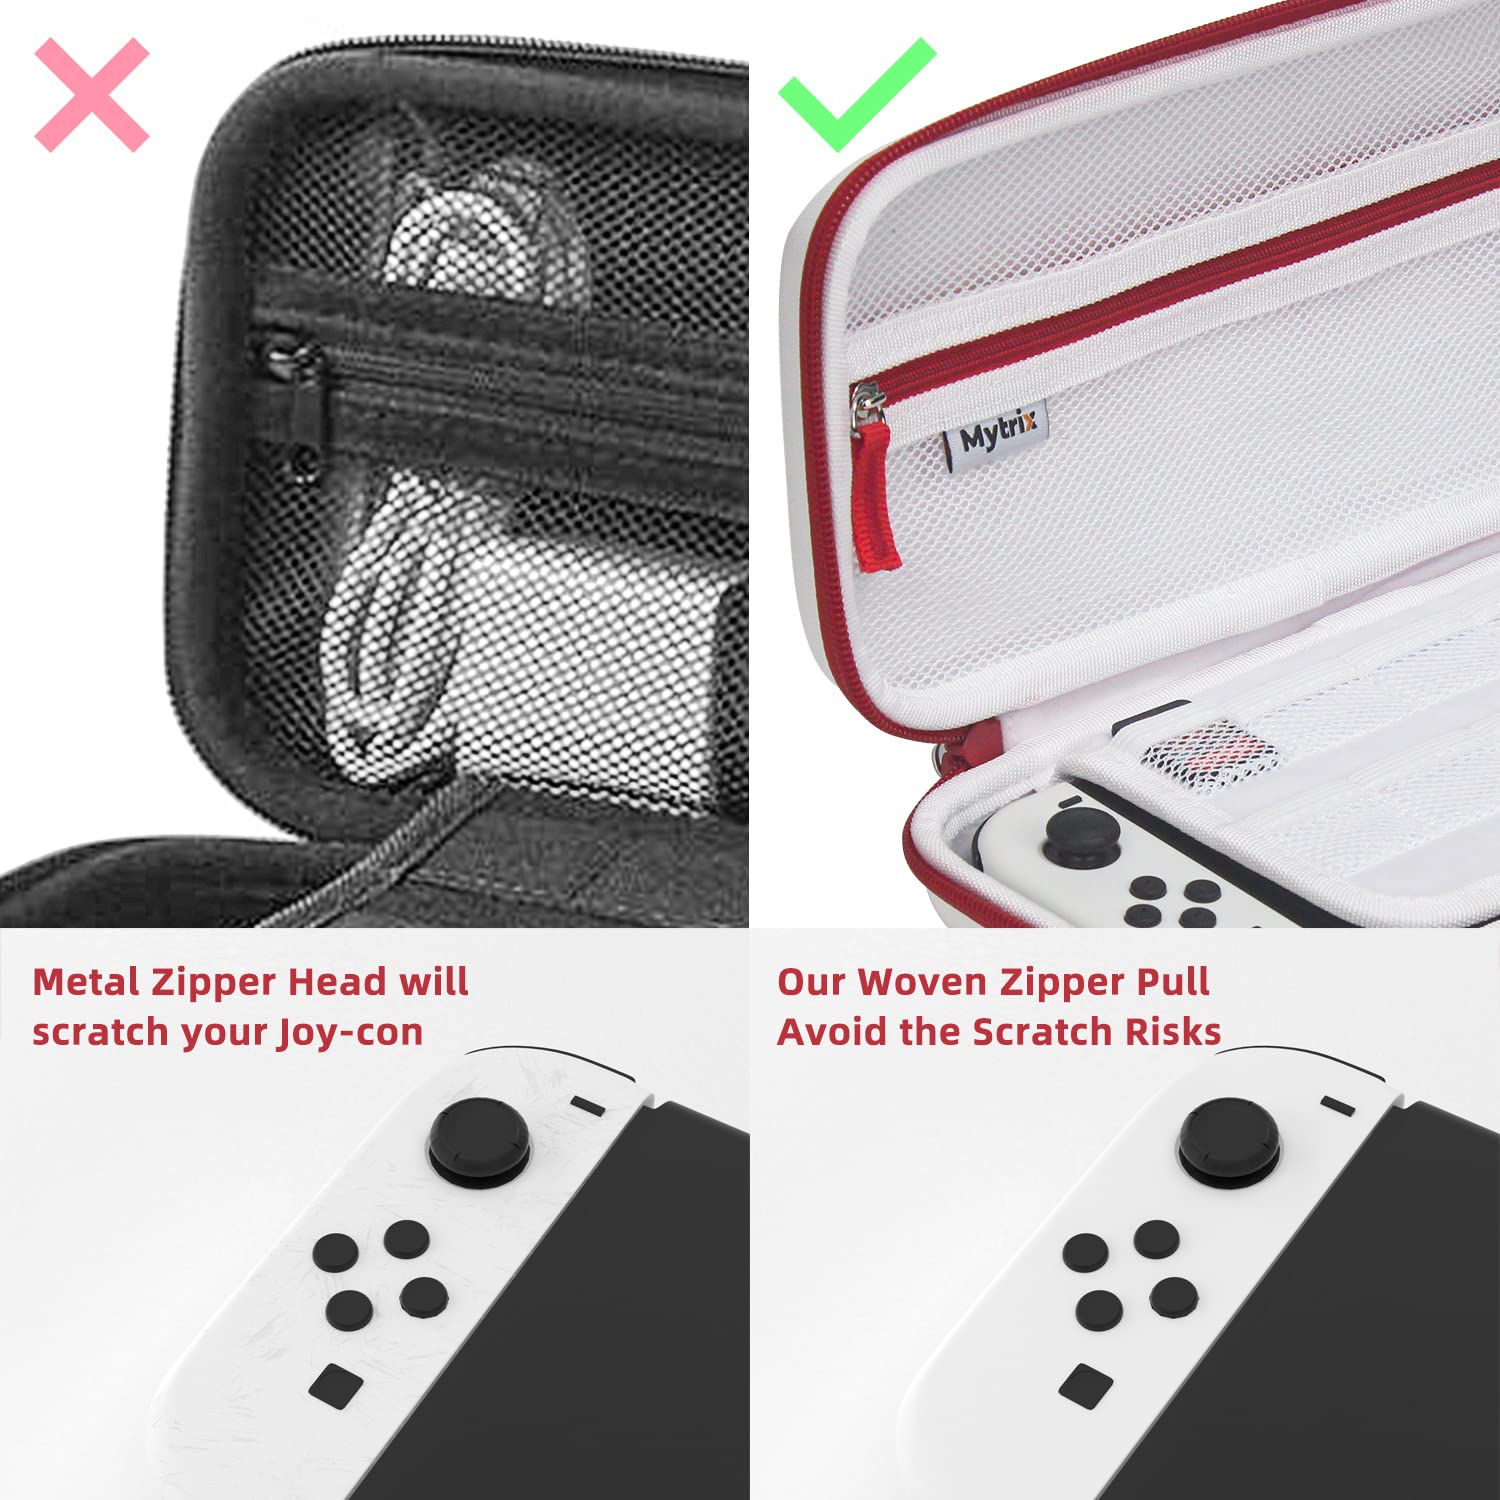 Mytrix Tuoro Switch Carrying Case for Nintendo Switch & Newest Switch OLED, Protective Travel Storage Bag with Shoulder Strap & 10 Card Slots